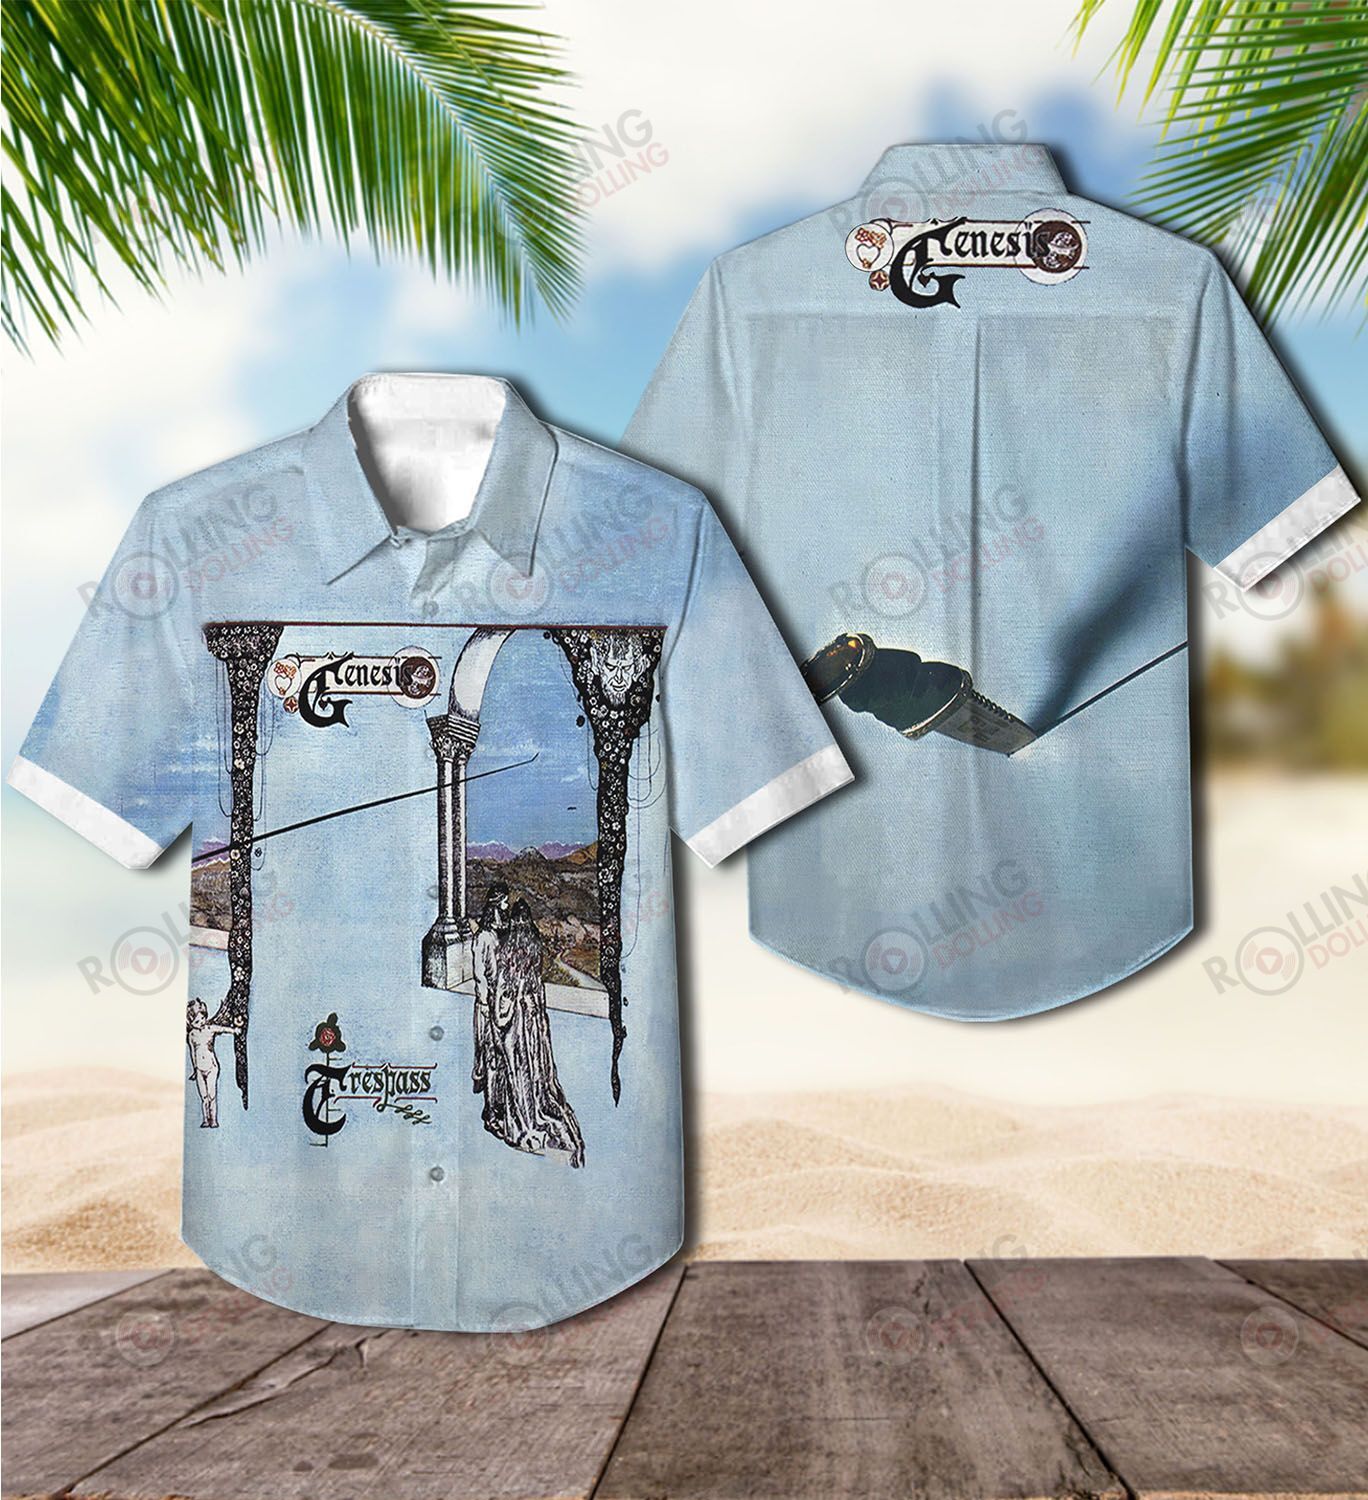 For summer, consider wearing This Amazing Hawaiian Shirt shirt in our store 202